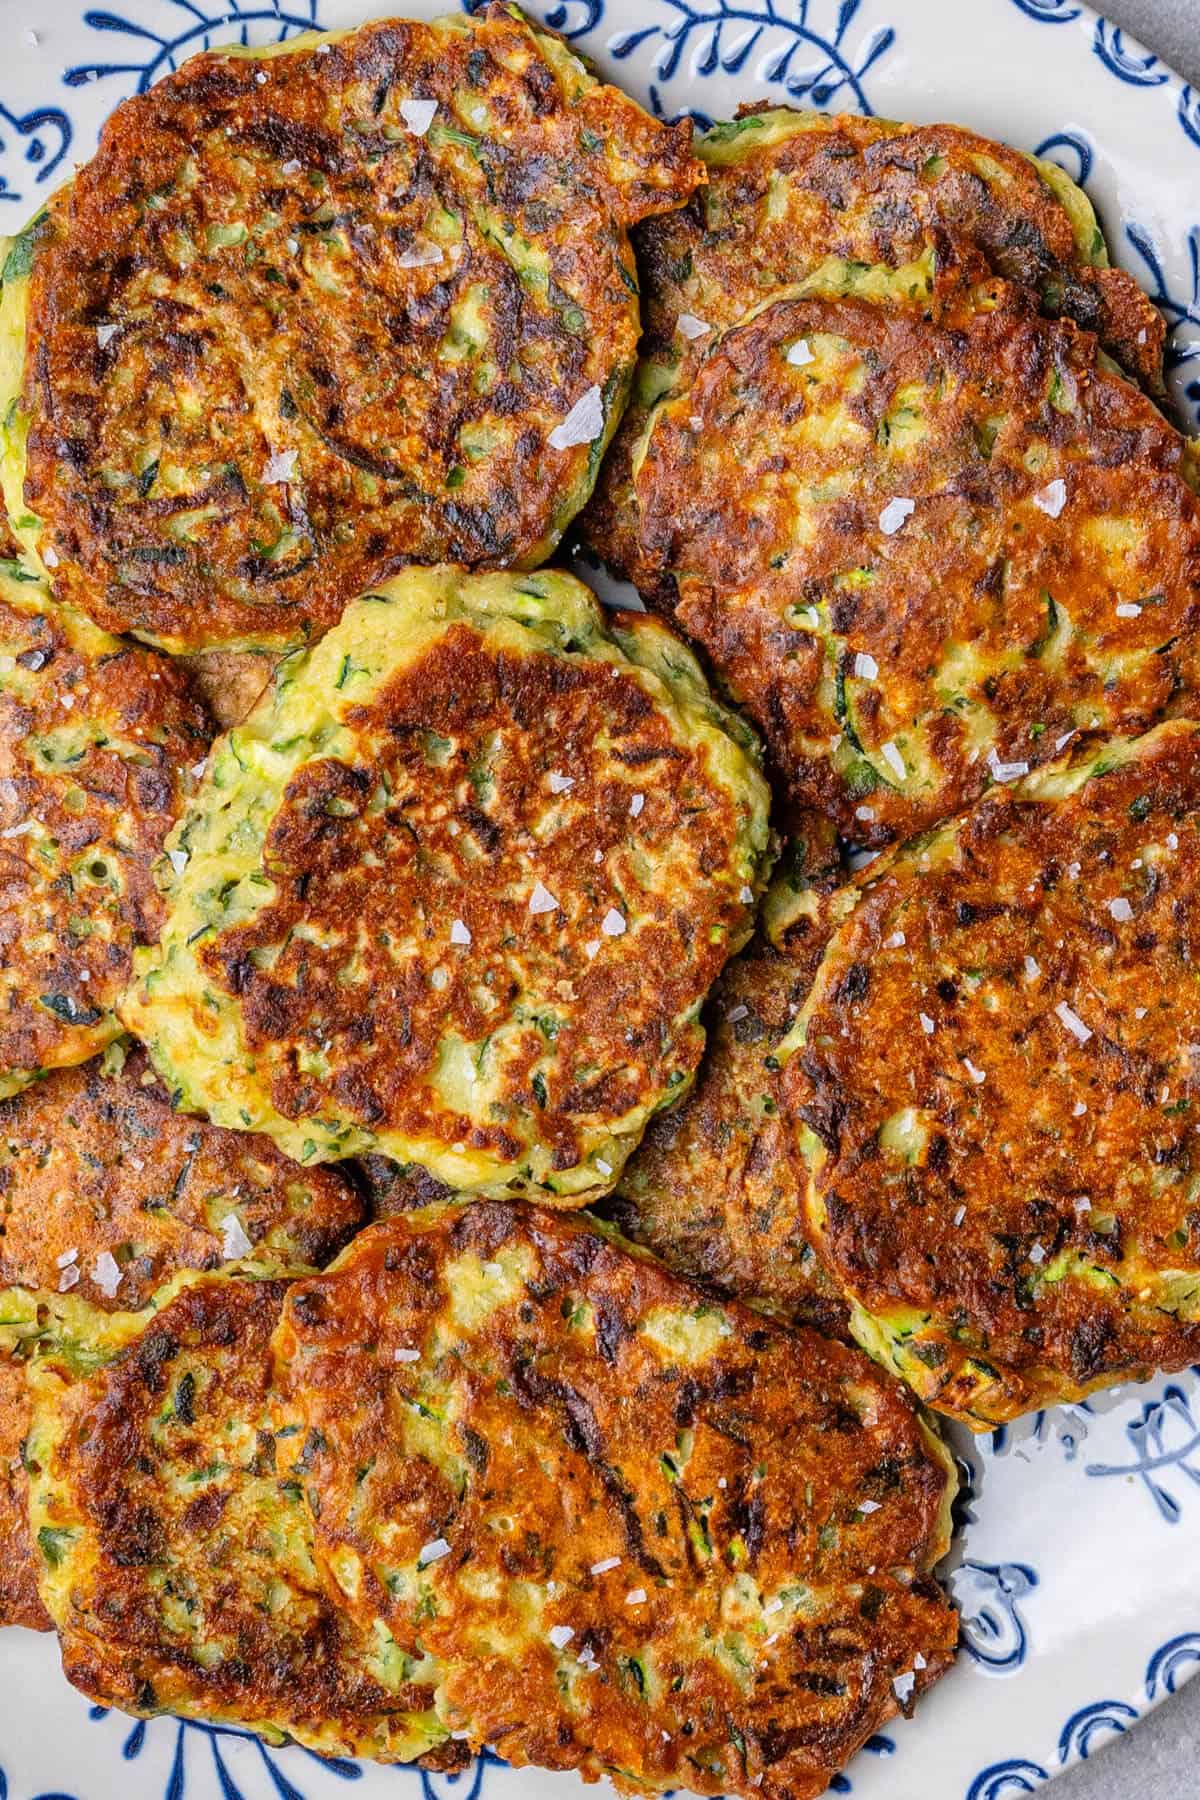 Plate of pan fried zucchini fritters